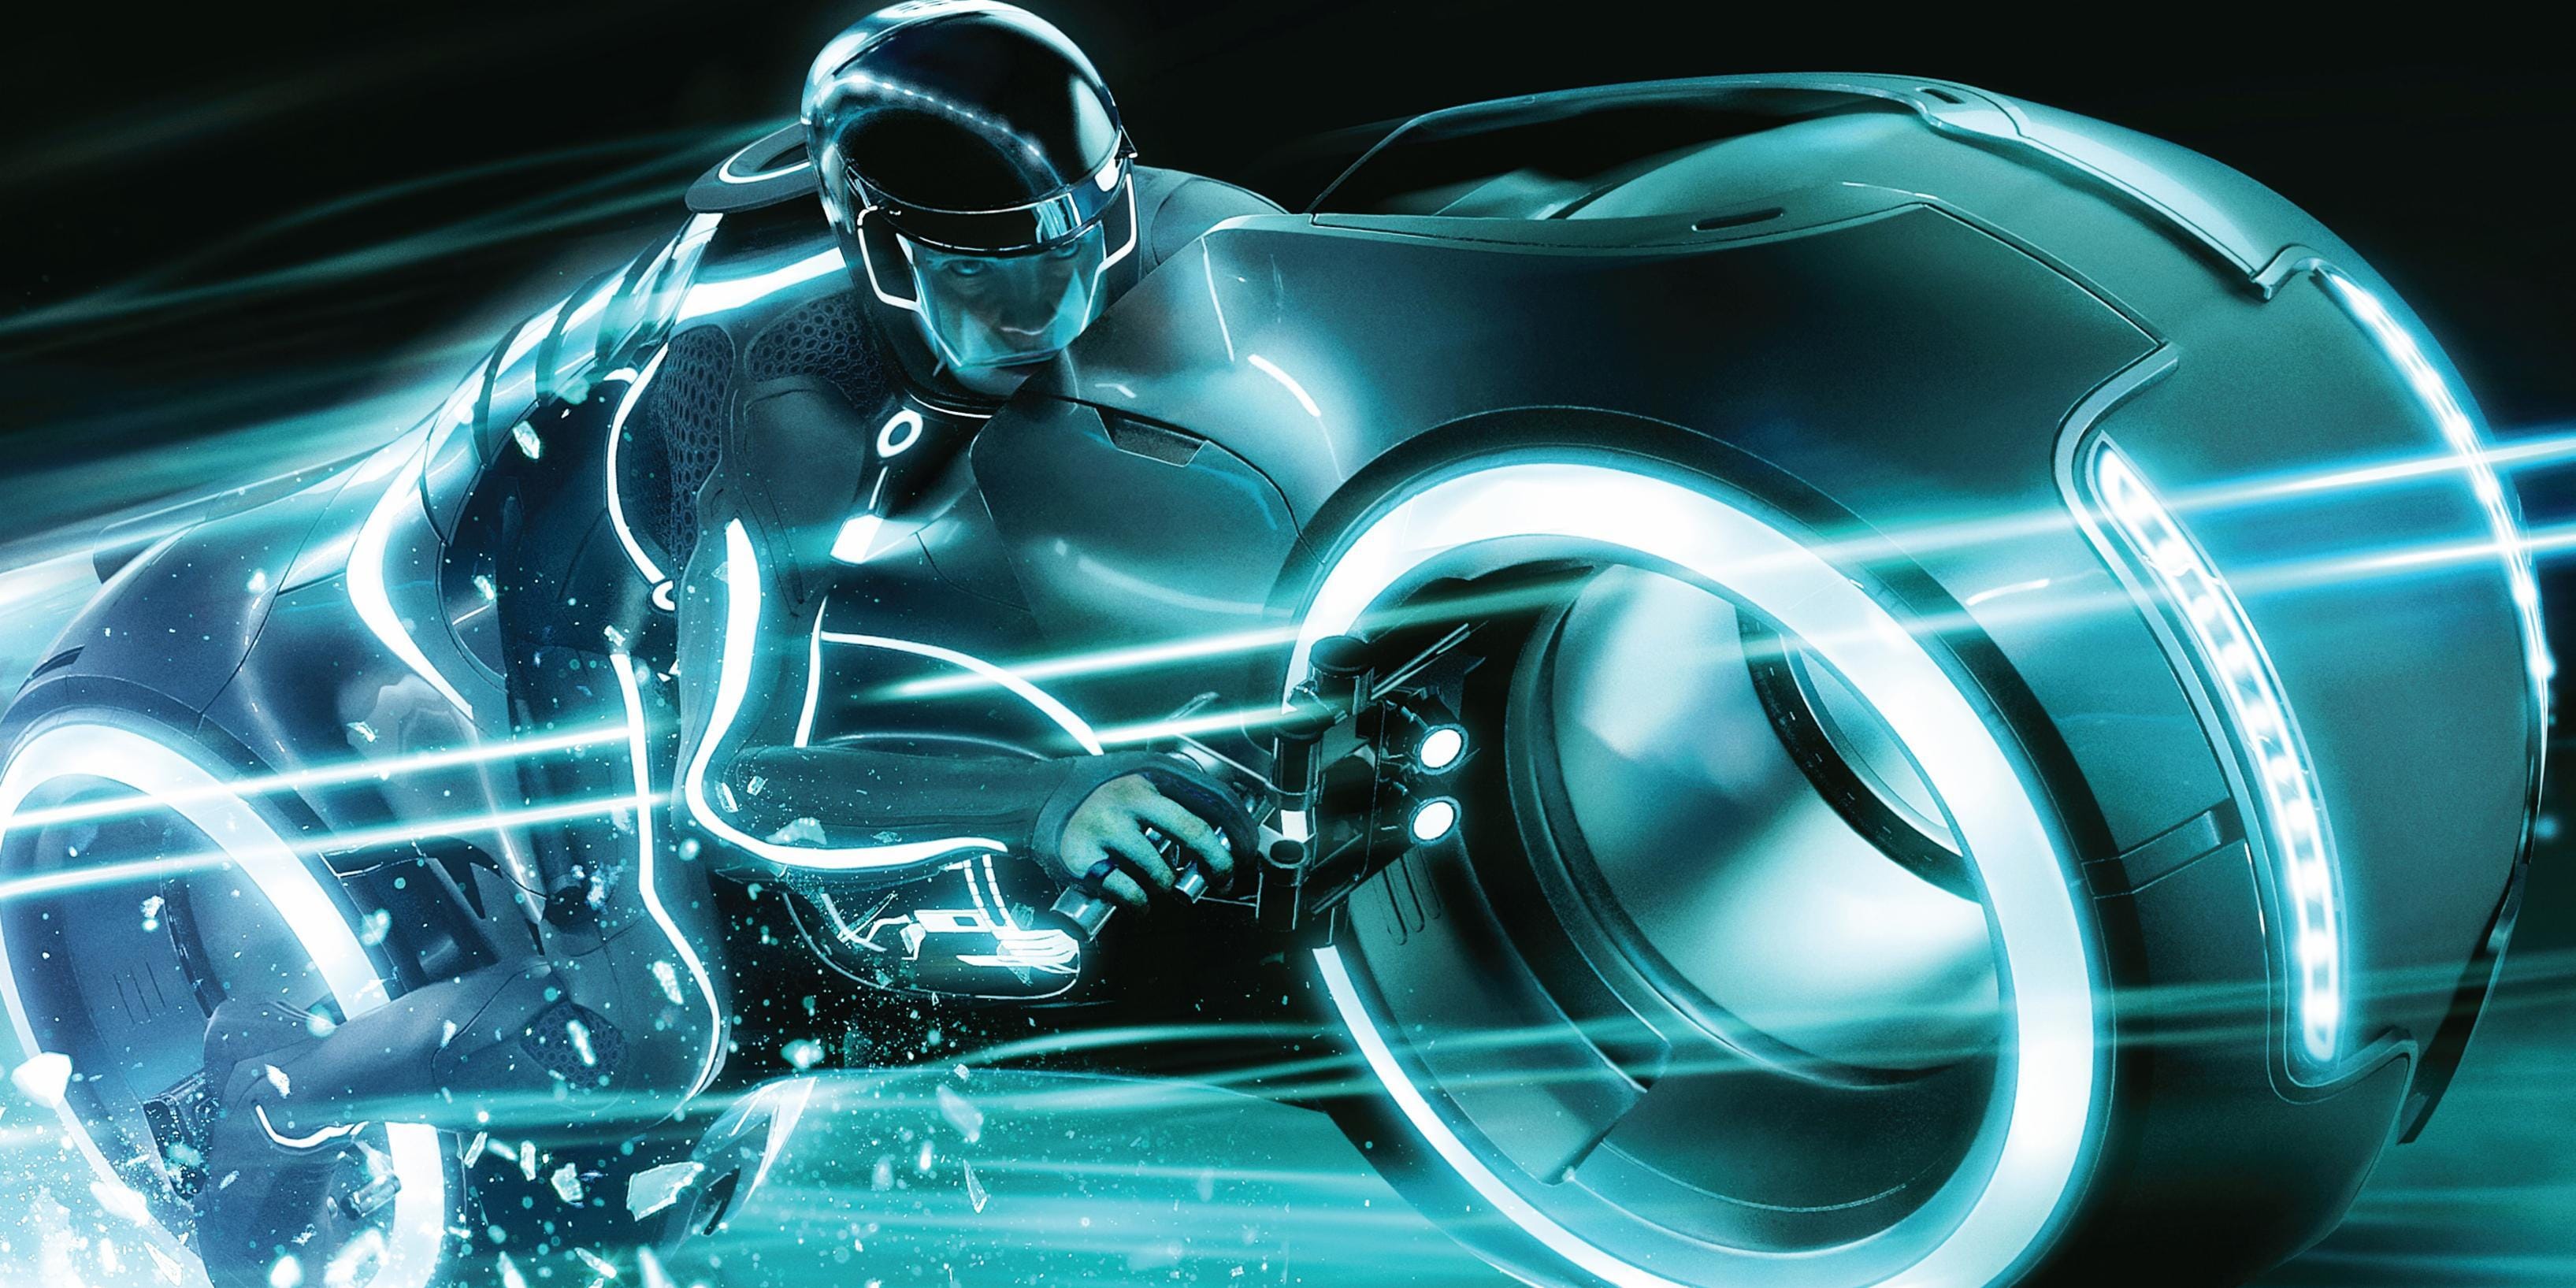 Tron Ares Fan Poster Wallpapers